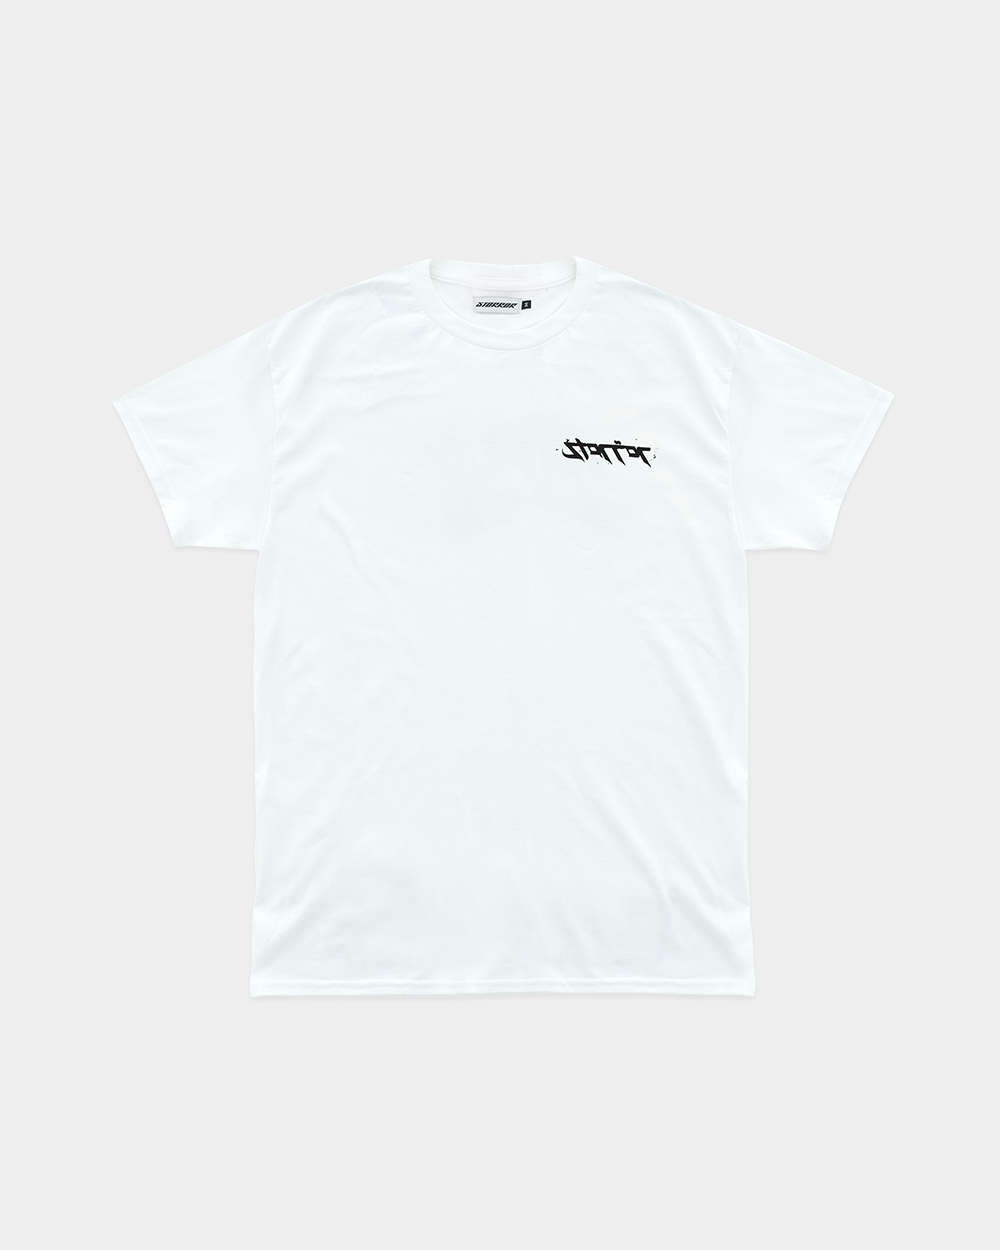 DYSTOPIA T-SHIRT | STORROR | parkour clothing & technical sportswear